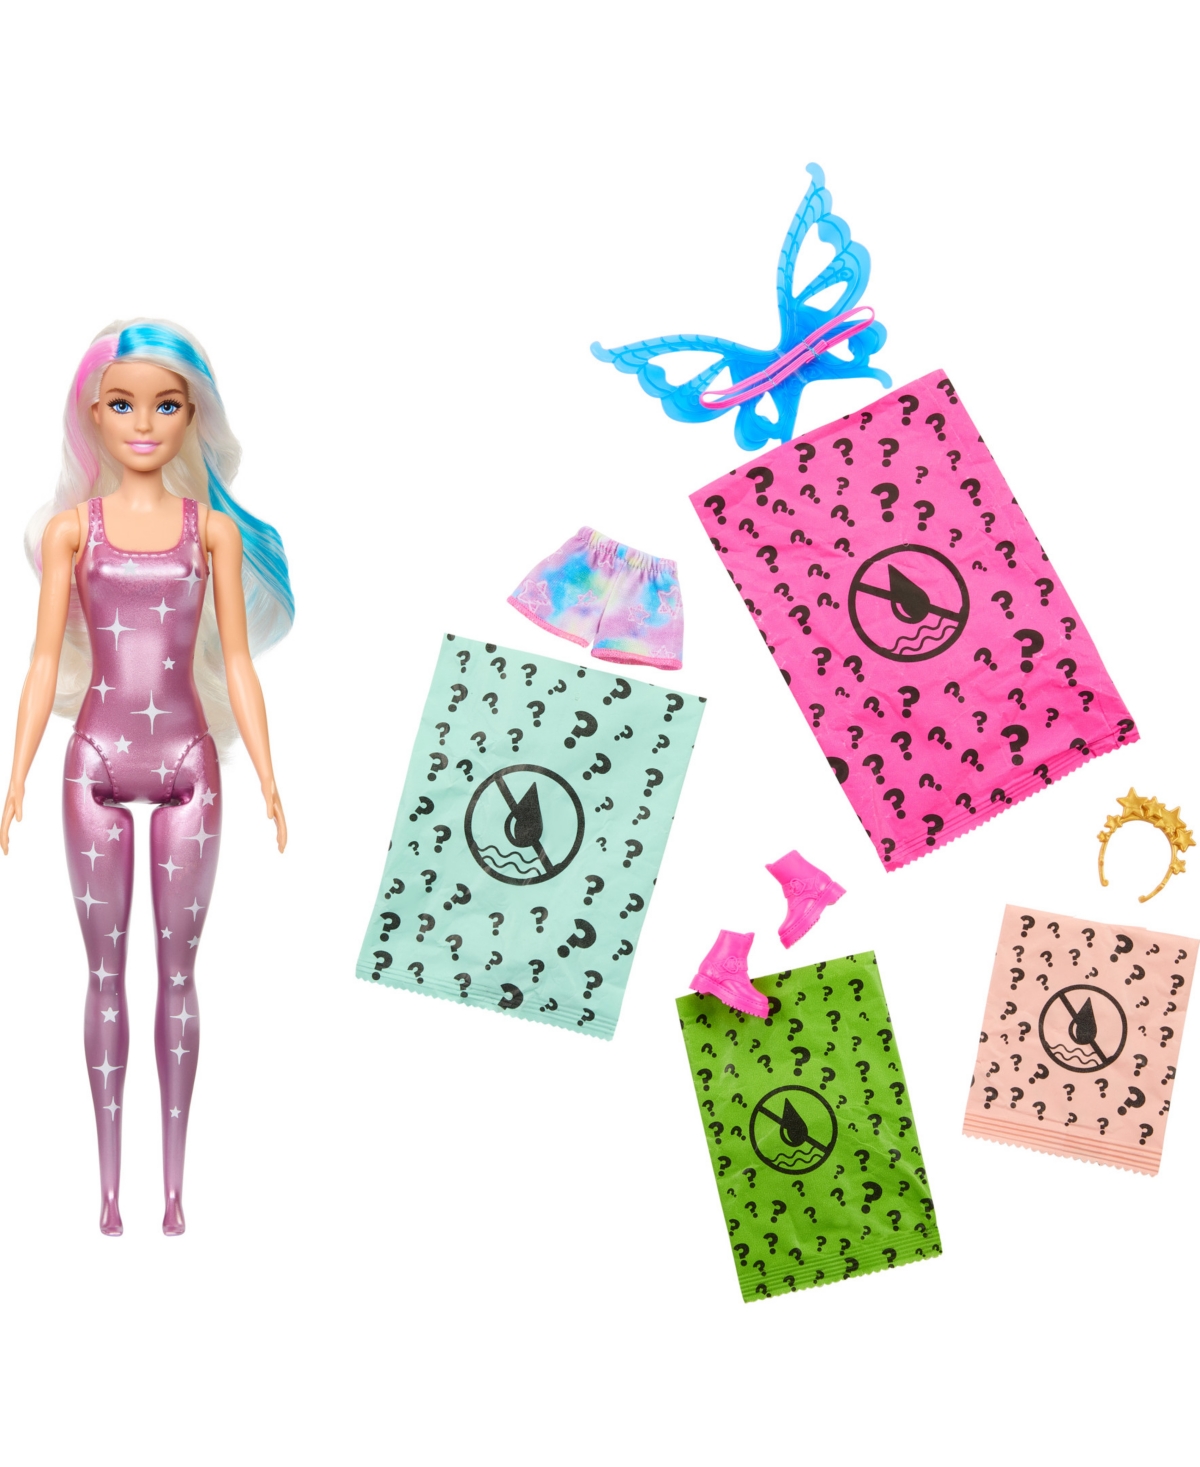 Barbie Kids' Color Reveal Doll With 6 Surprises, Rainbow Galaxy Series-style May Vary In Multi-color